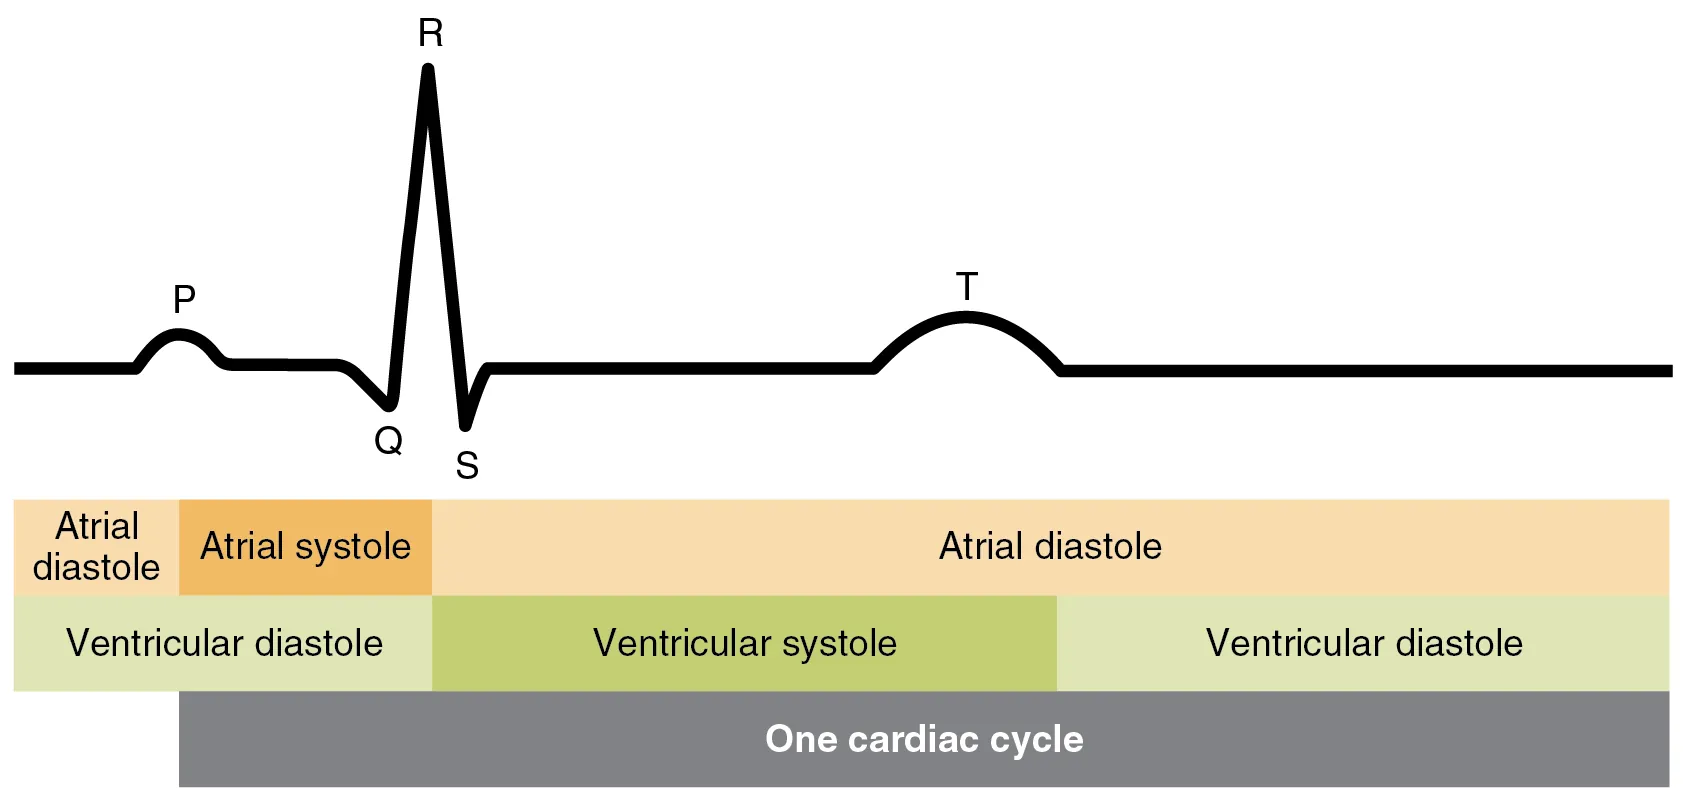 This image shows the correlation between the cardiac cycle and the different stages in a electrocardiogram.